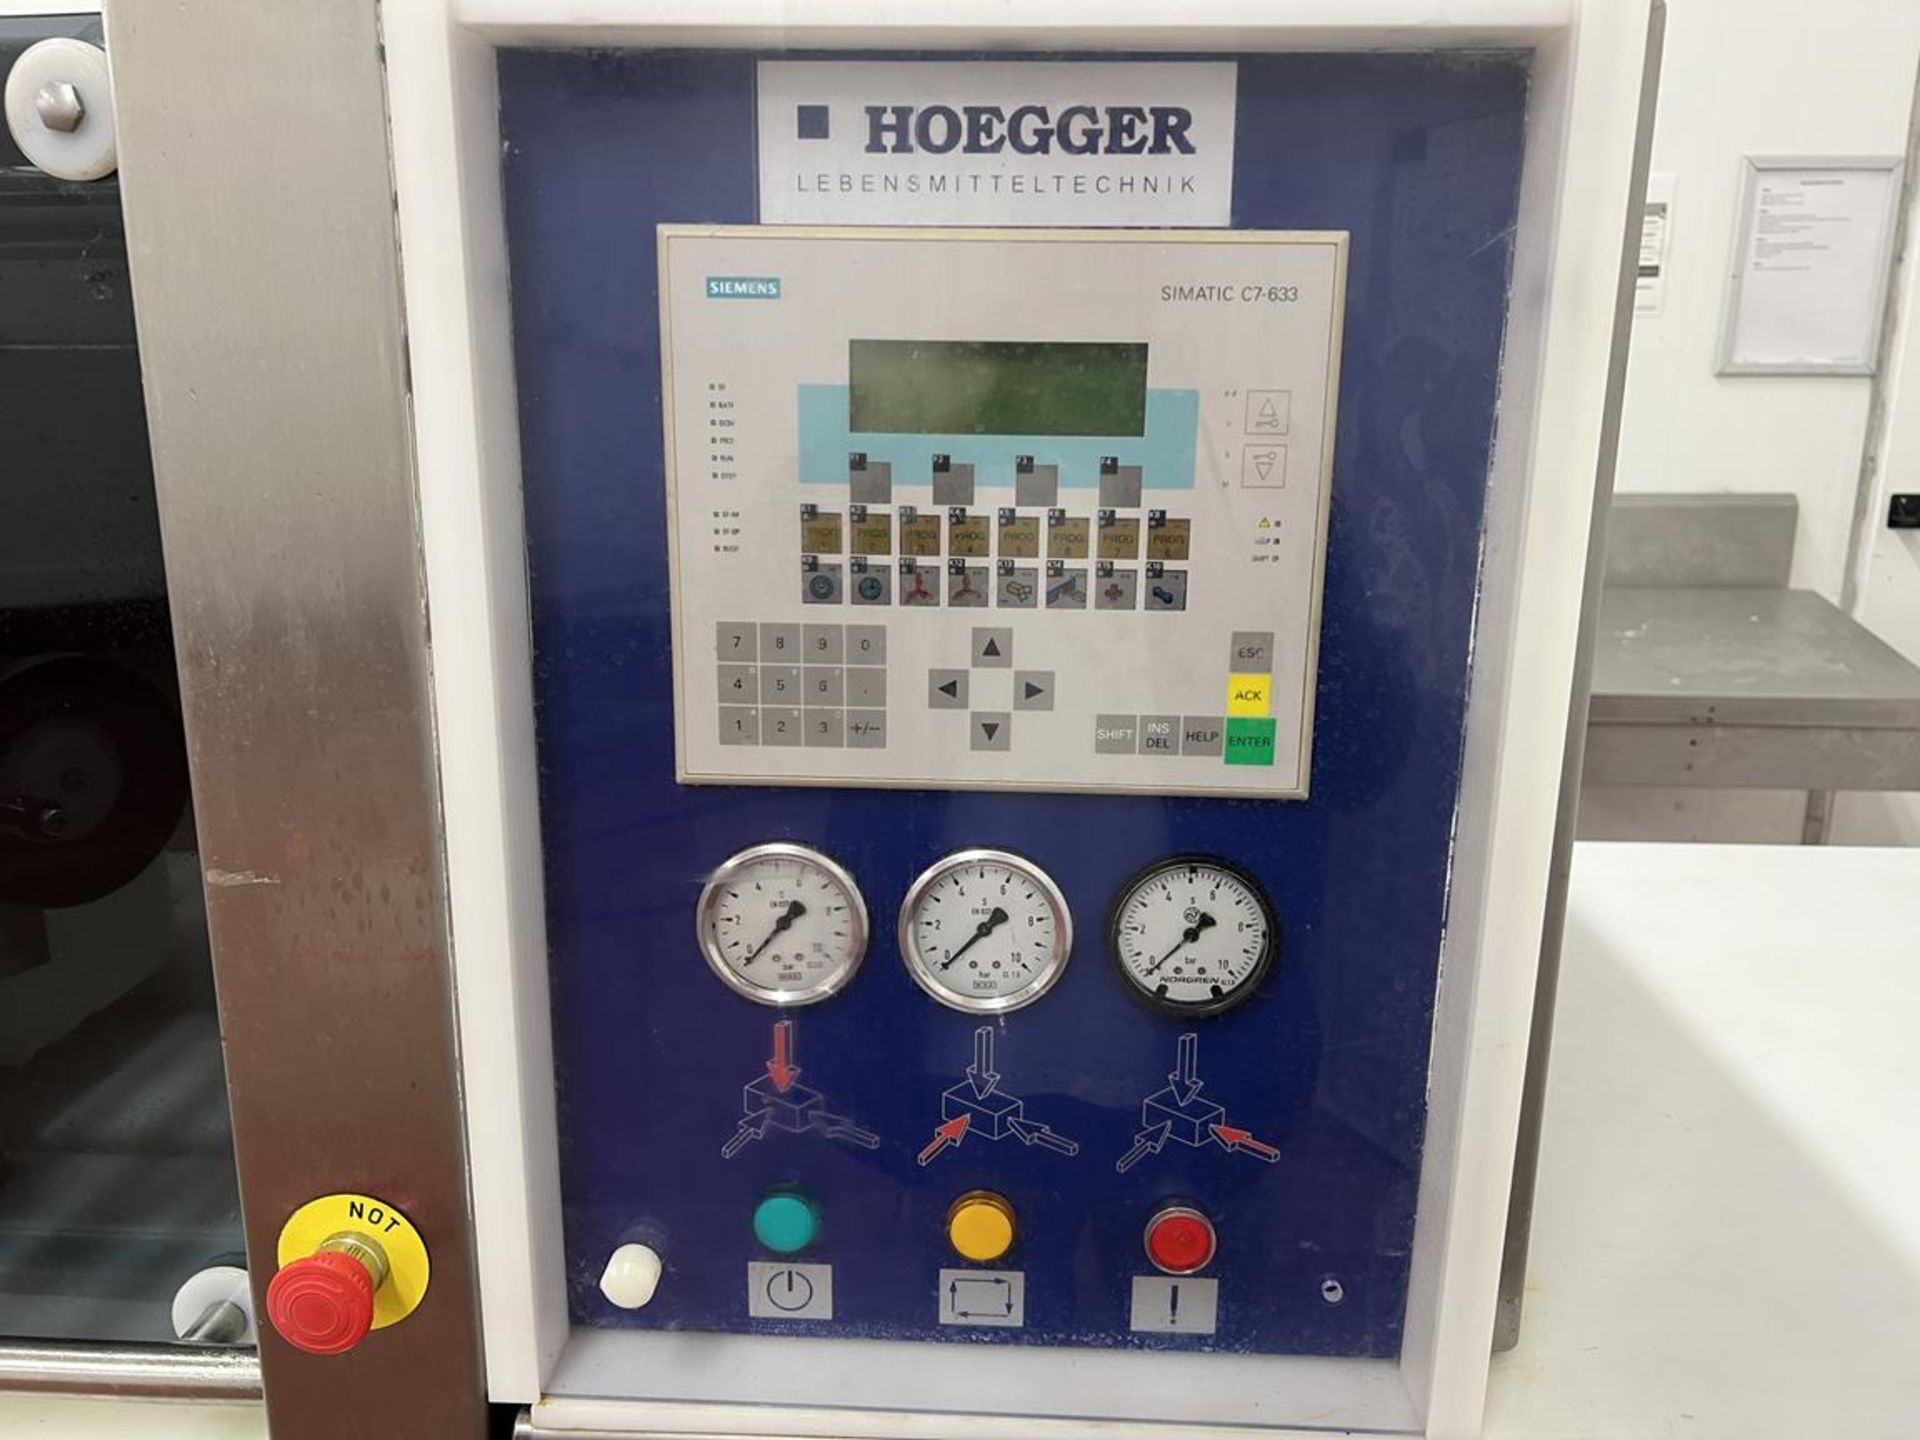 Hoegger, Flieischpresse SP280 hydraulic meat forming press, Serial No. 04-193 (DOM: 2005) - Image 3 of 5